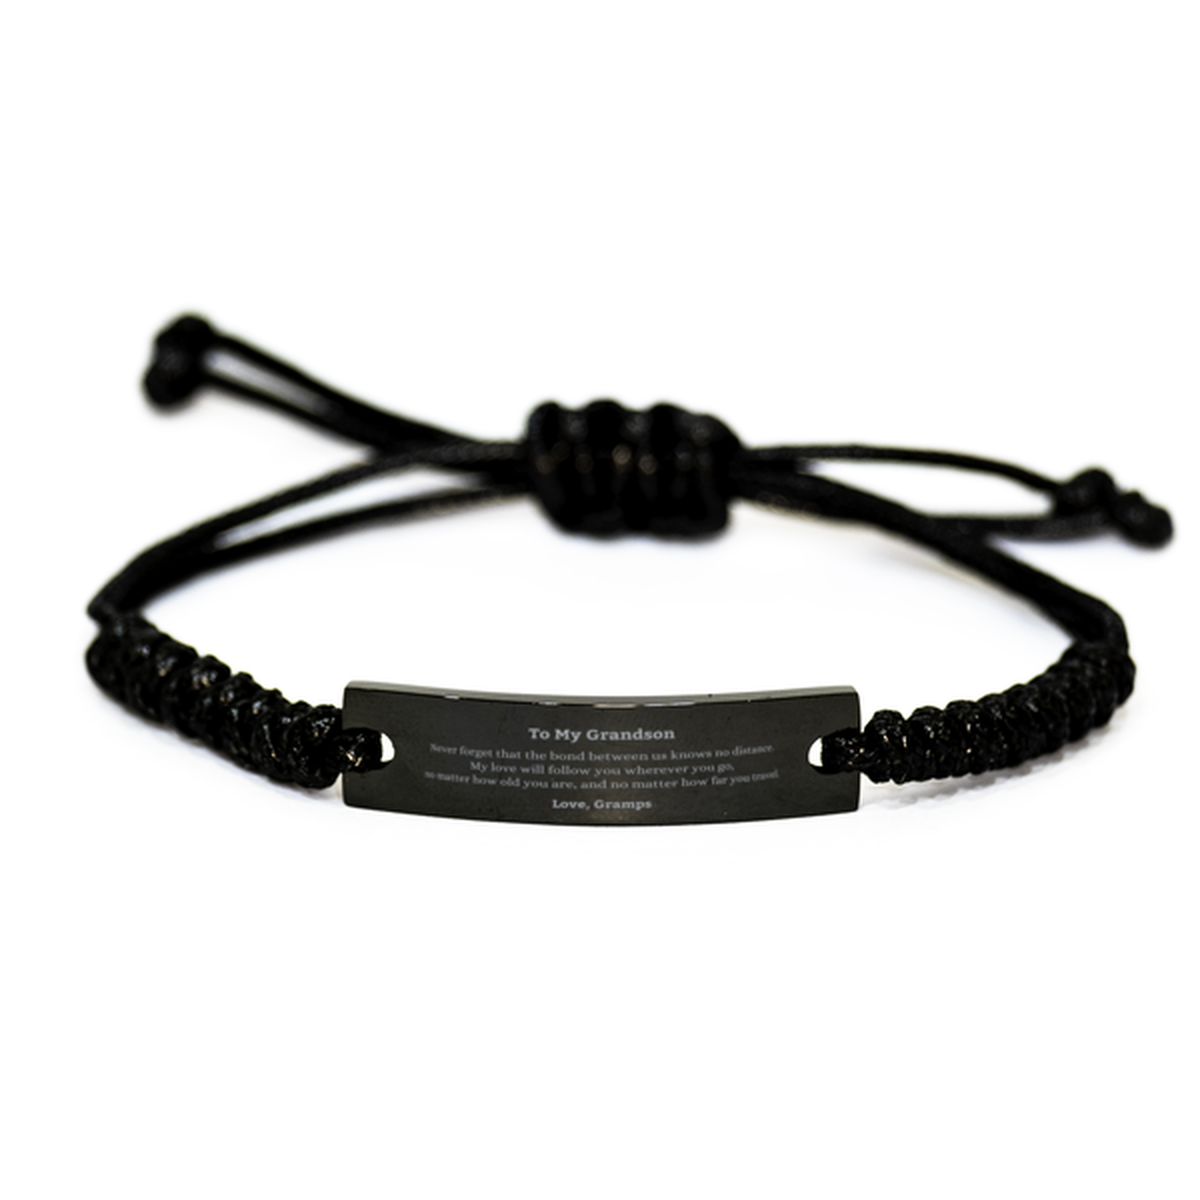 Grandson Birthday Gifts from Gramps, Adjustable Black Rope Bracelet for Grandson Christmas Graduation Unique Gifts Grandson Never forget that the bond between us knows no distance. Love, Gramps